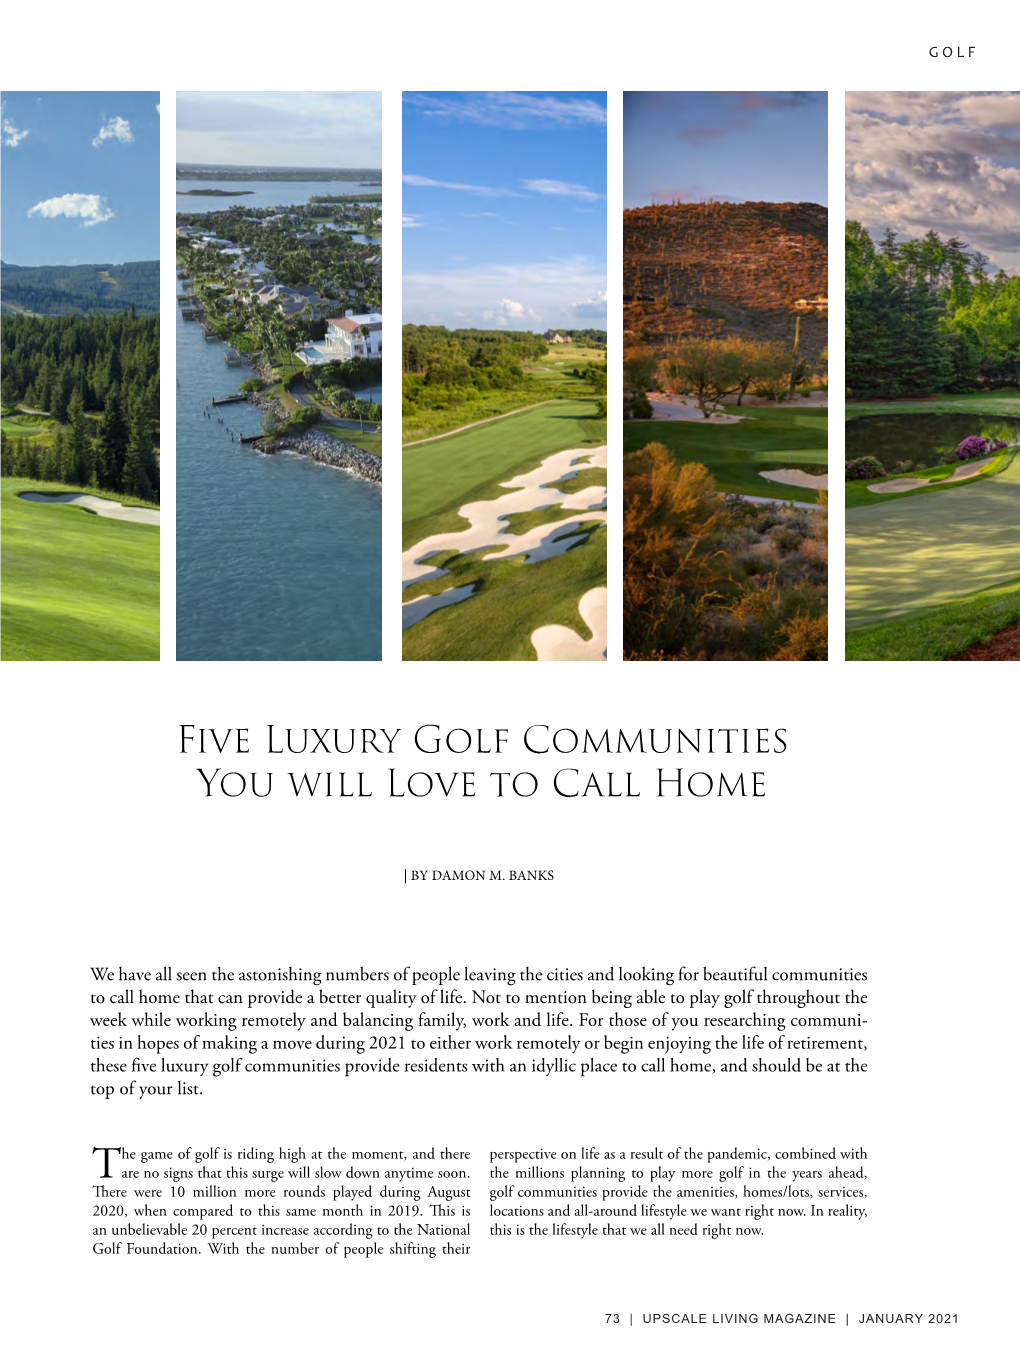 Five Luxury Golf Communities You Will Love to Call Home